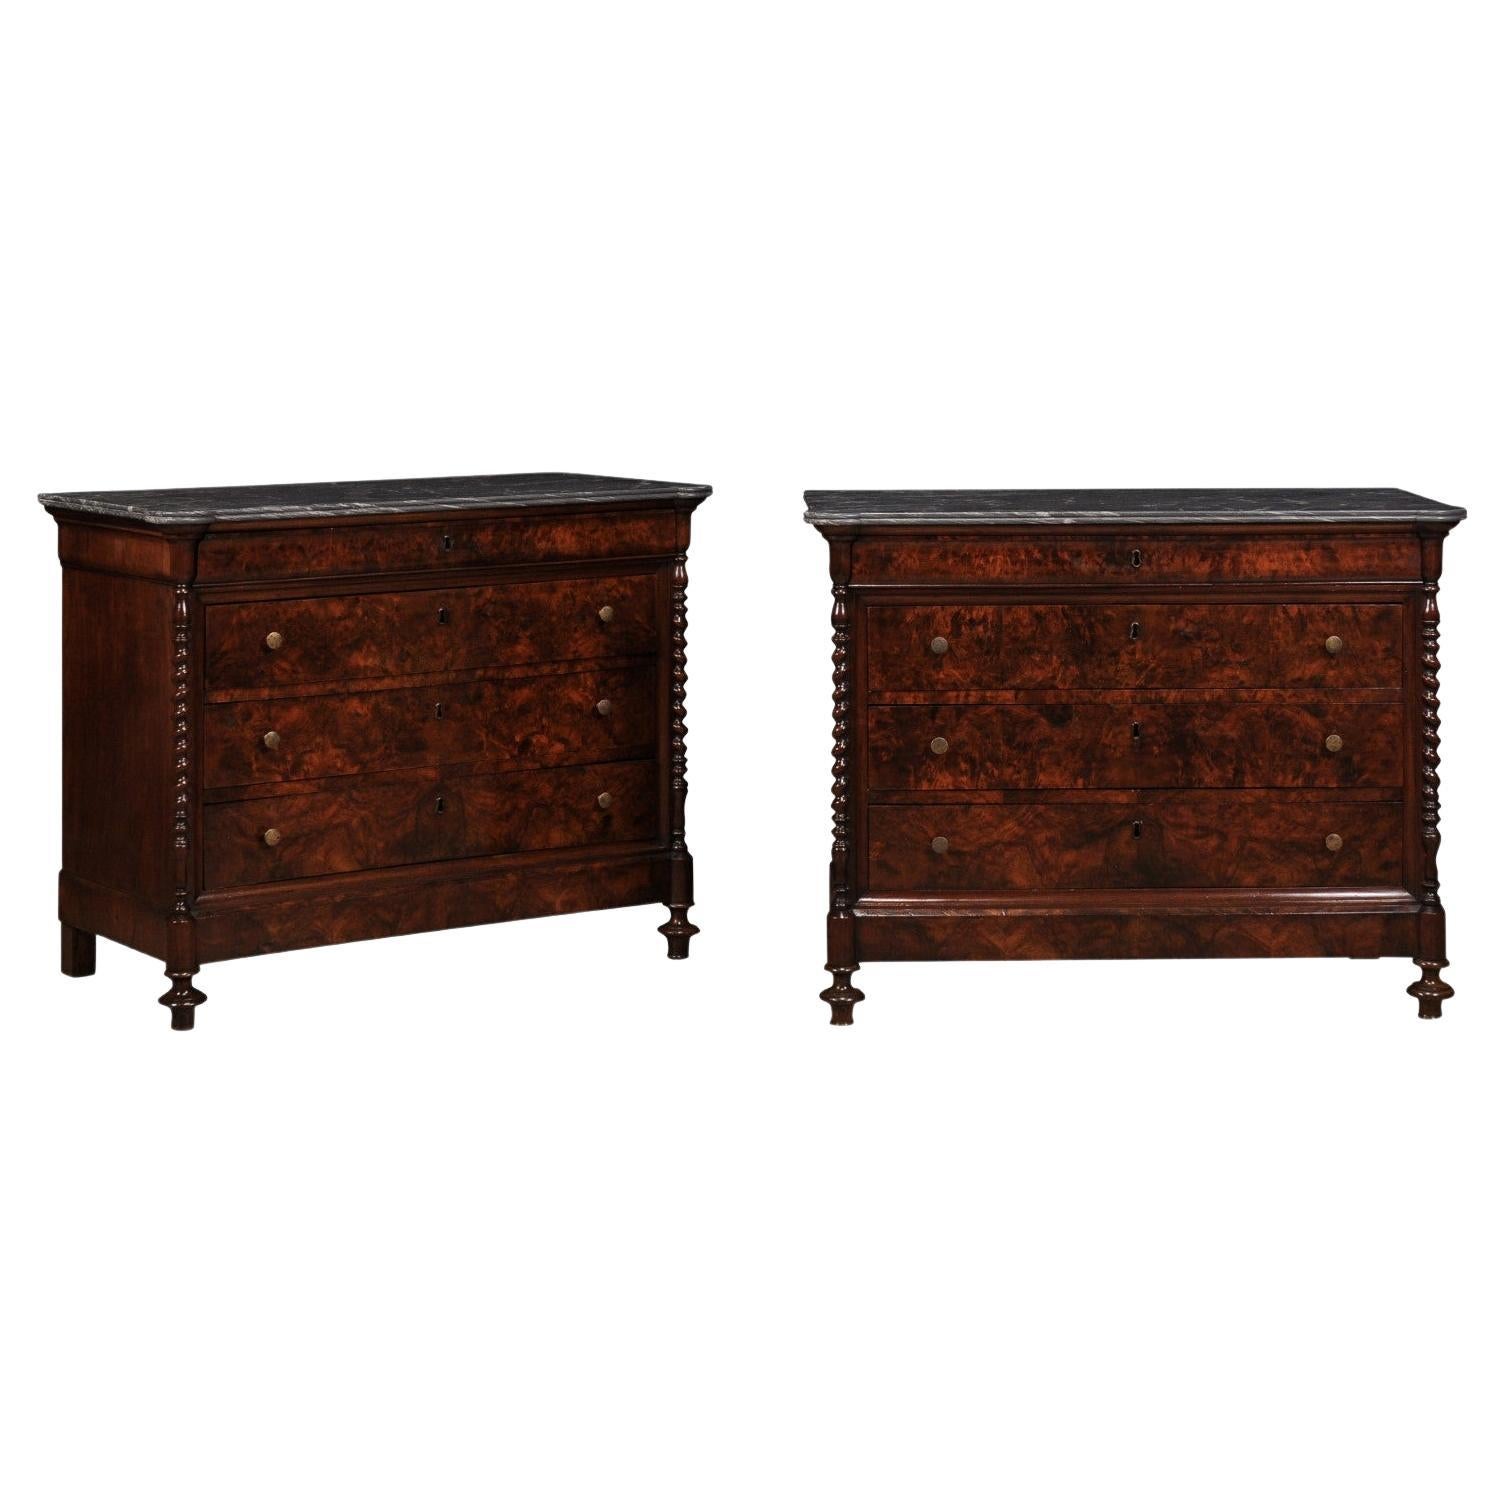 Italian 1830s Burl Walnut Commodes from Lombardi with Gray Marble Tops, a Pair For Sale